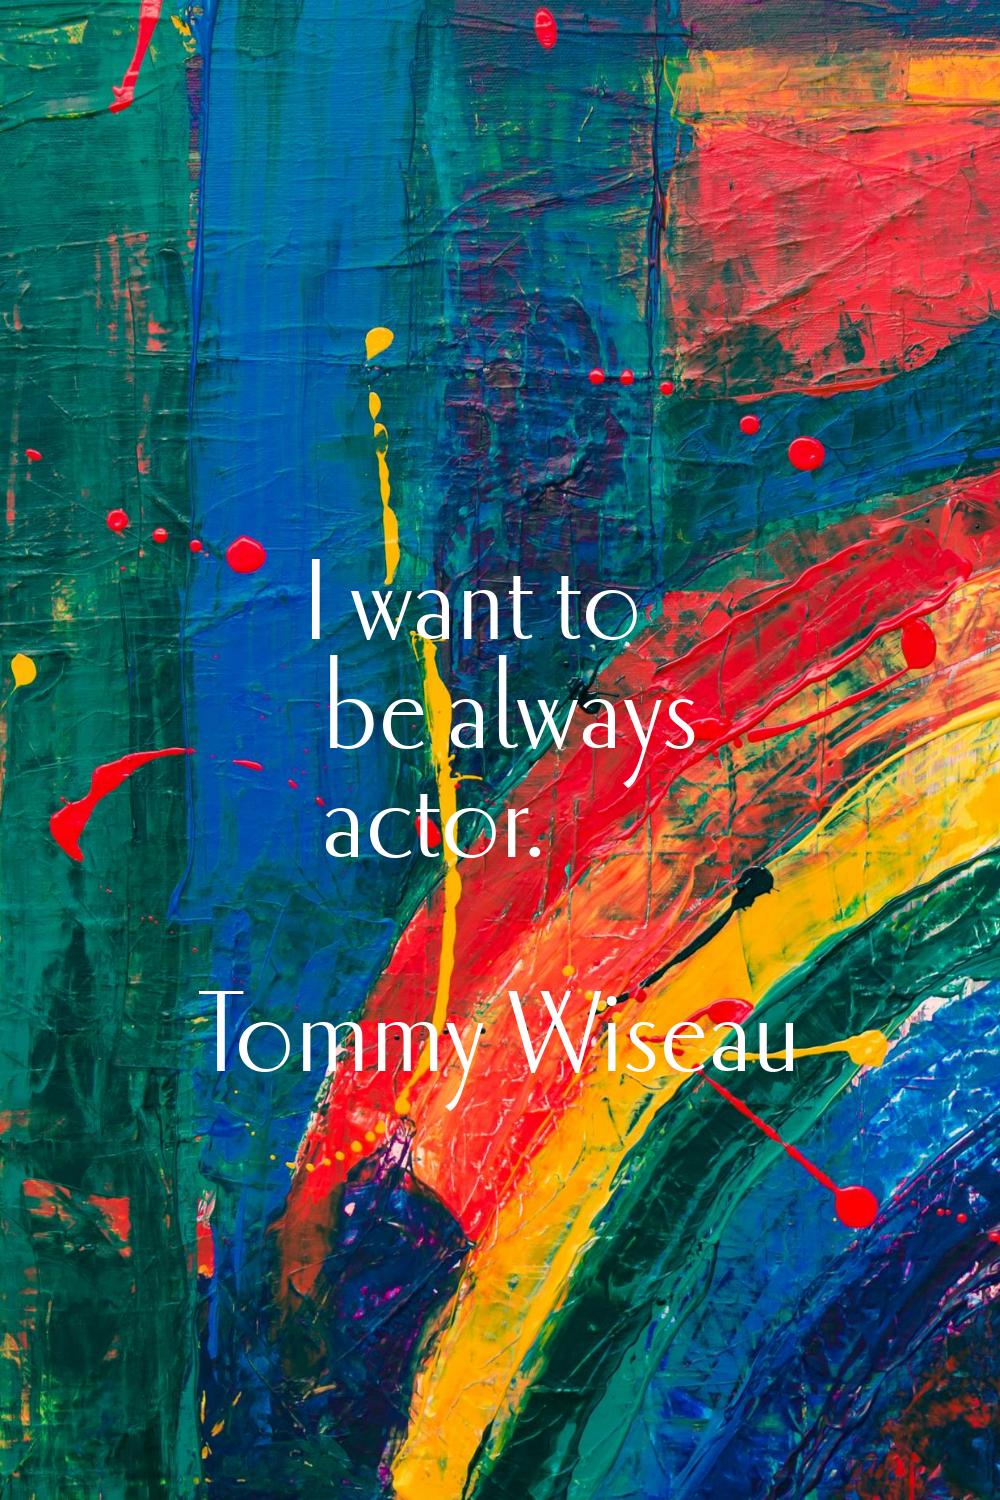 I want to be always actor.